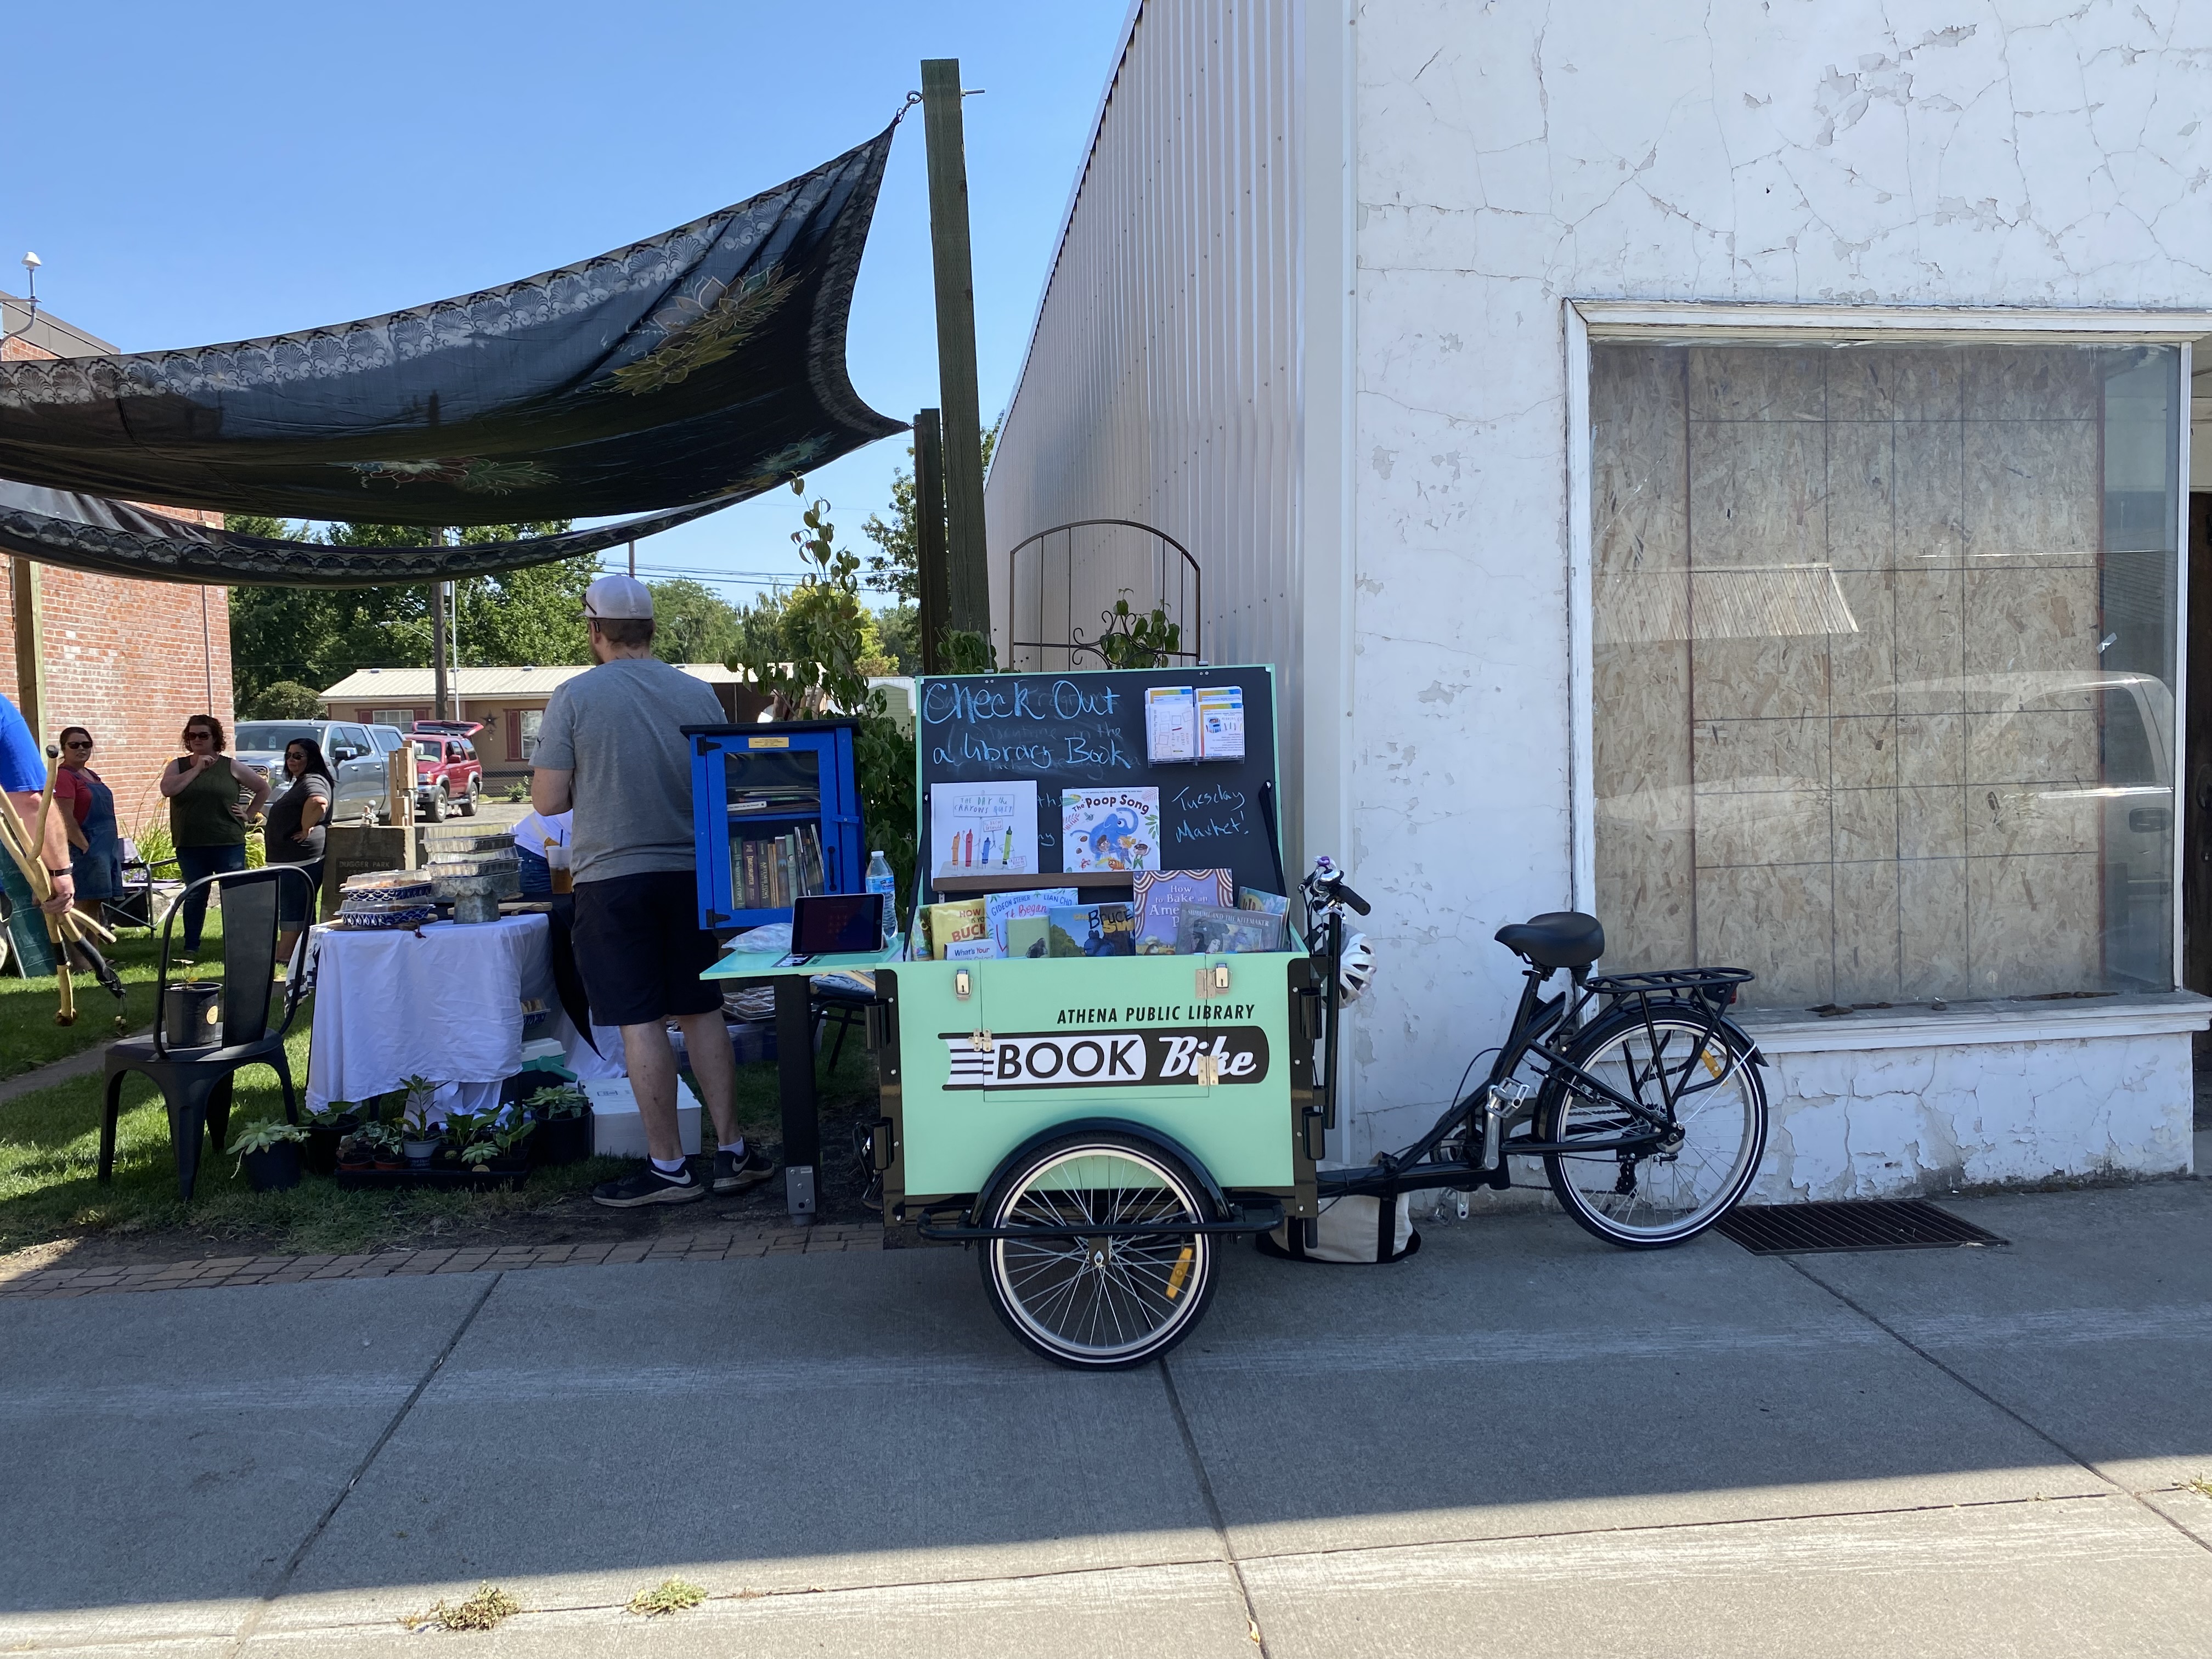 Photograph of the book bike at the Farmers Market